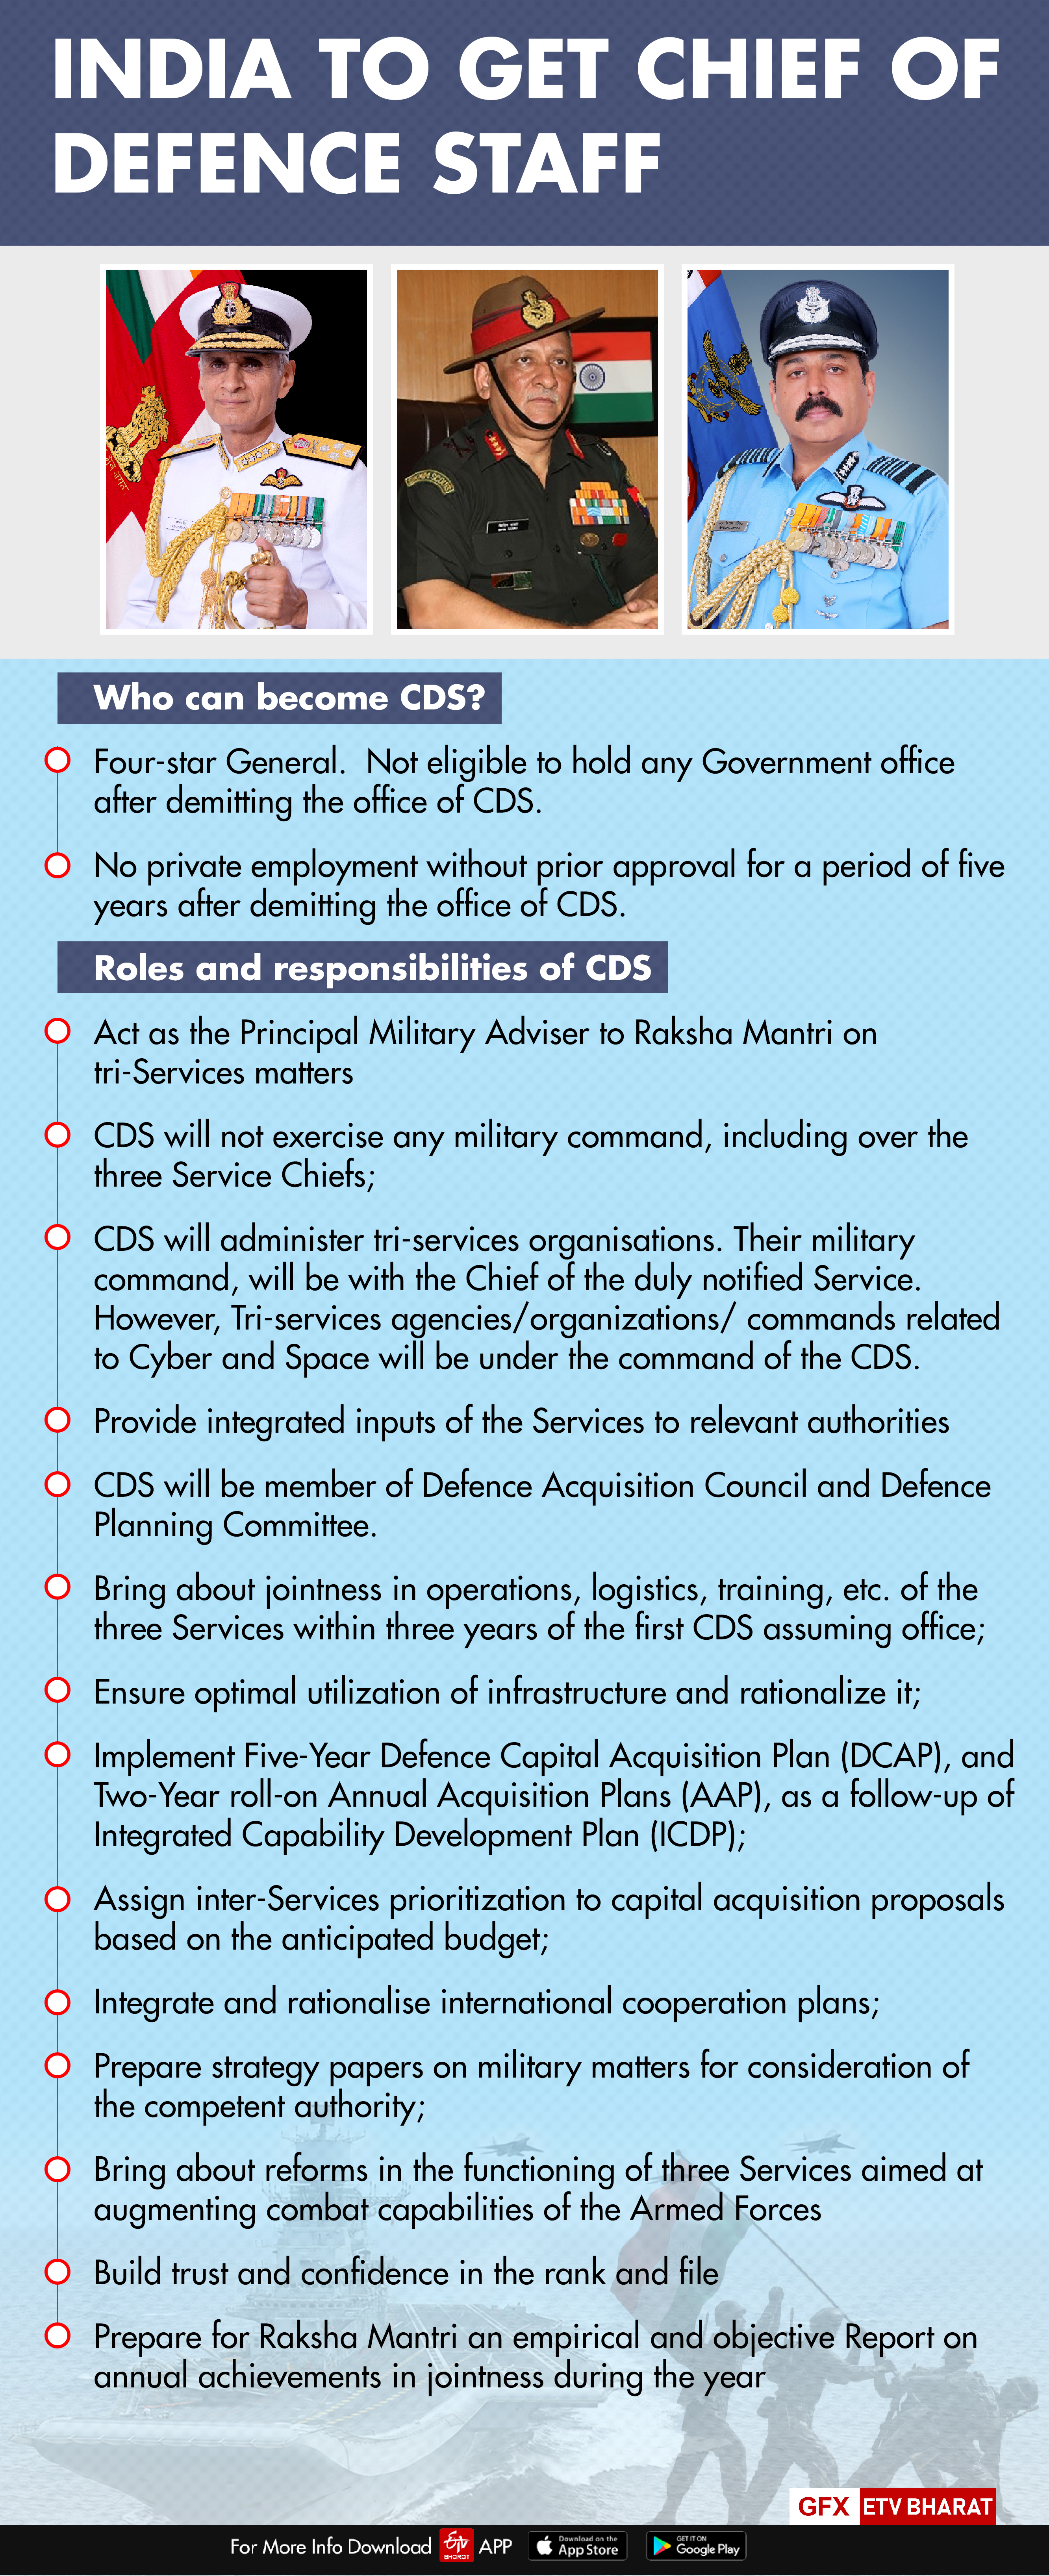 The responsibilities of the CDS